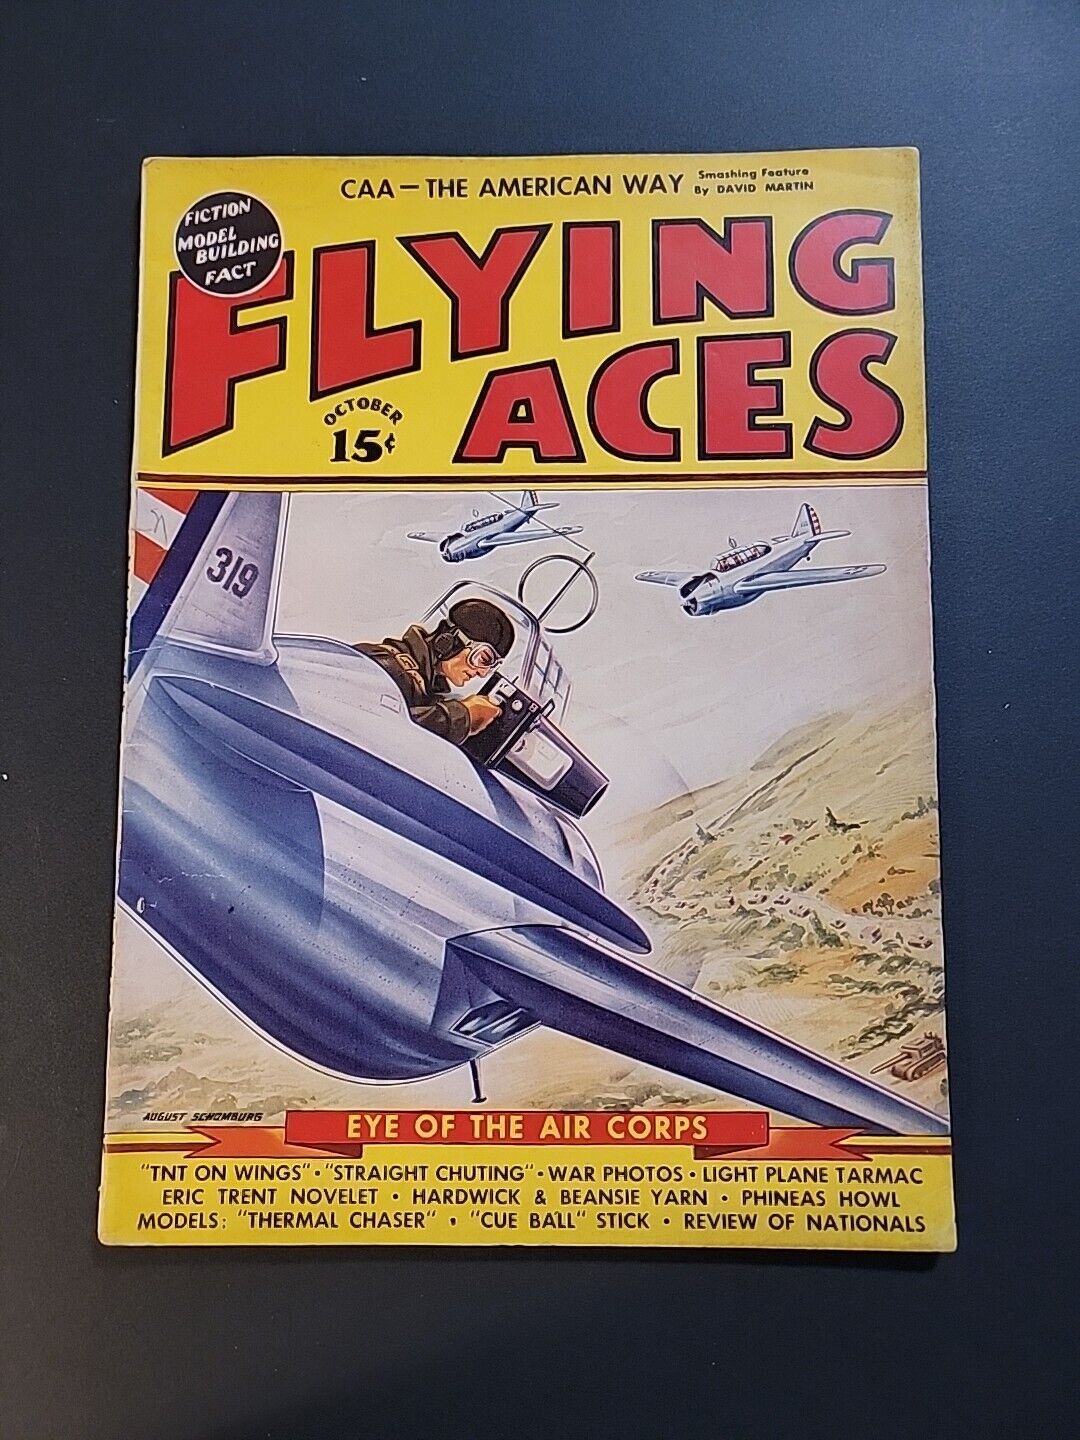 WW2✈️ 1940 OCT FLYING ACES MAGAZINE ILLUSTRATED FRONT COVER